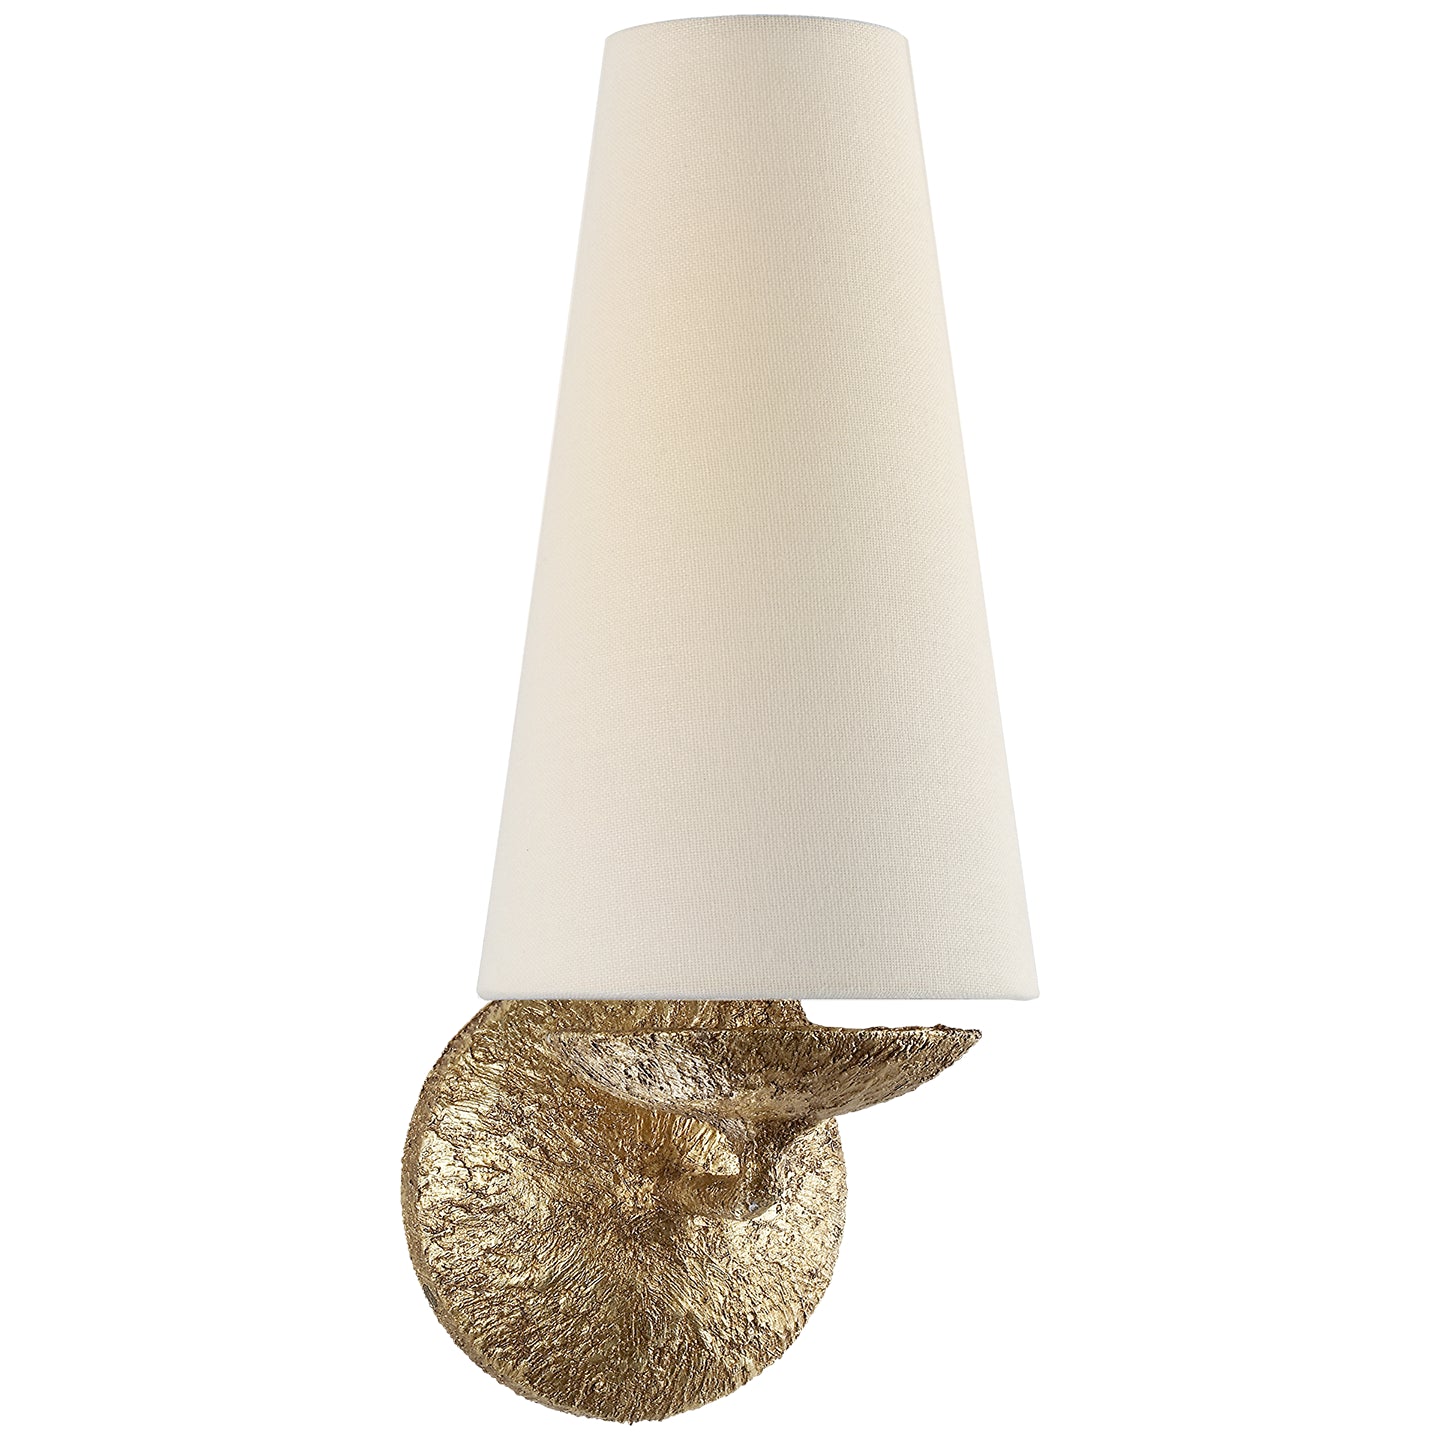 Load image into Gallery viewer, Visual Comfort Signature - ARN 2201GP-L - One Light Wall Sconce - Fontaine - Gilded Plaster
